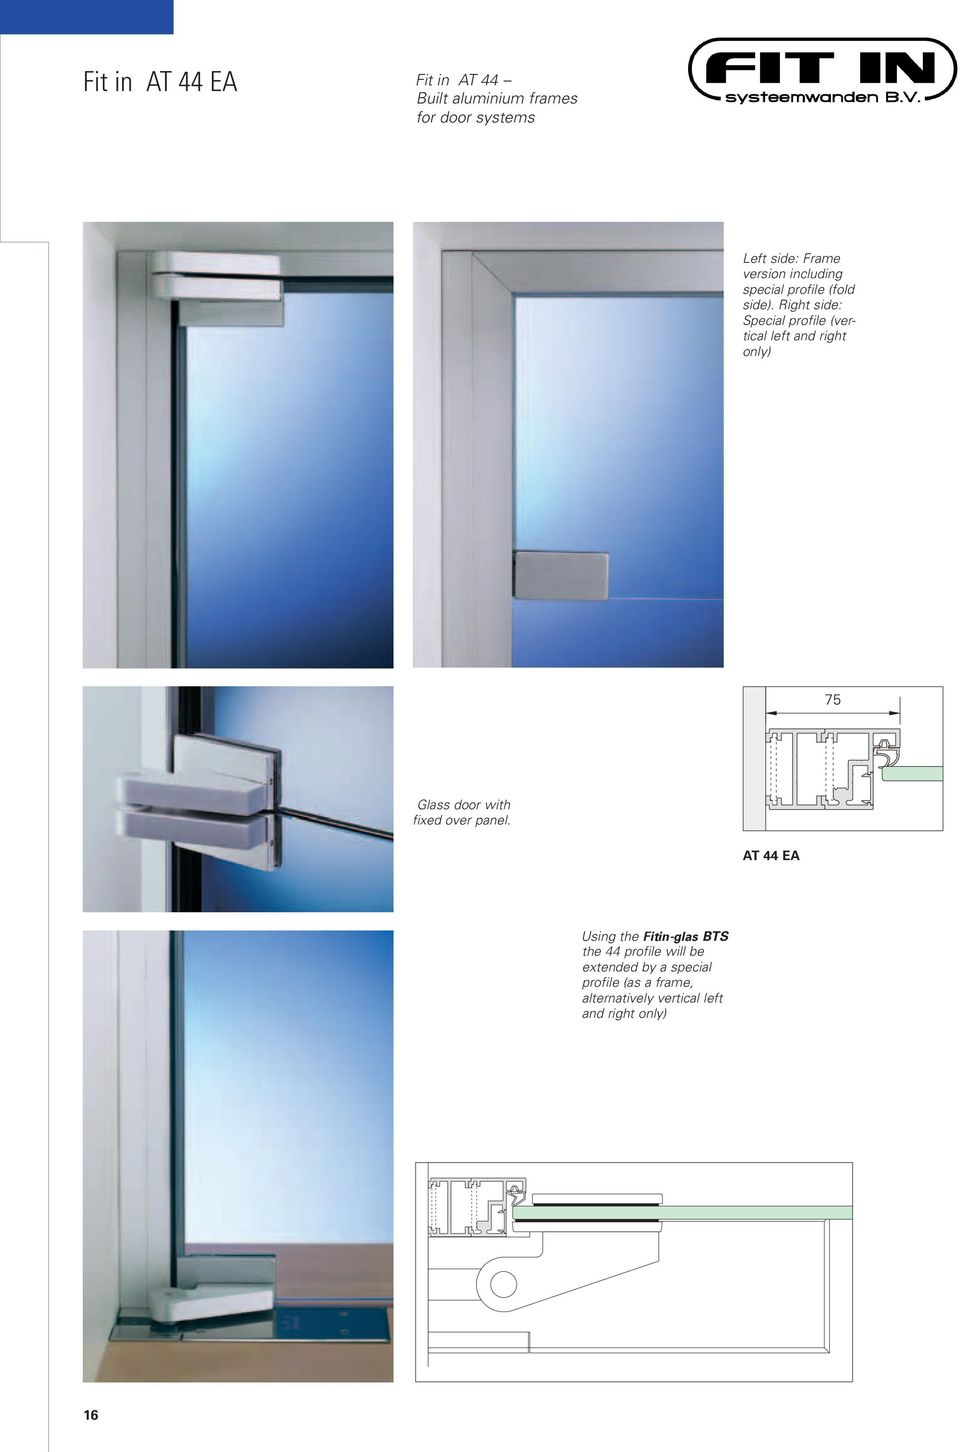 Right side: Special profile (vertical left and right only) 75 Glass door with fixed over